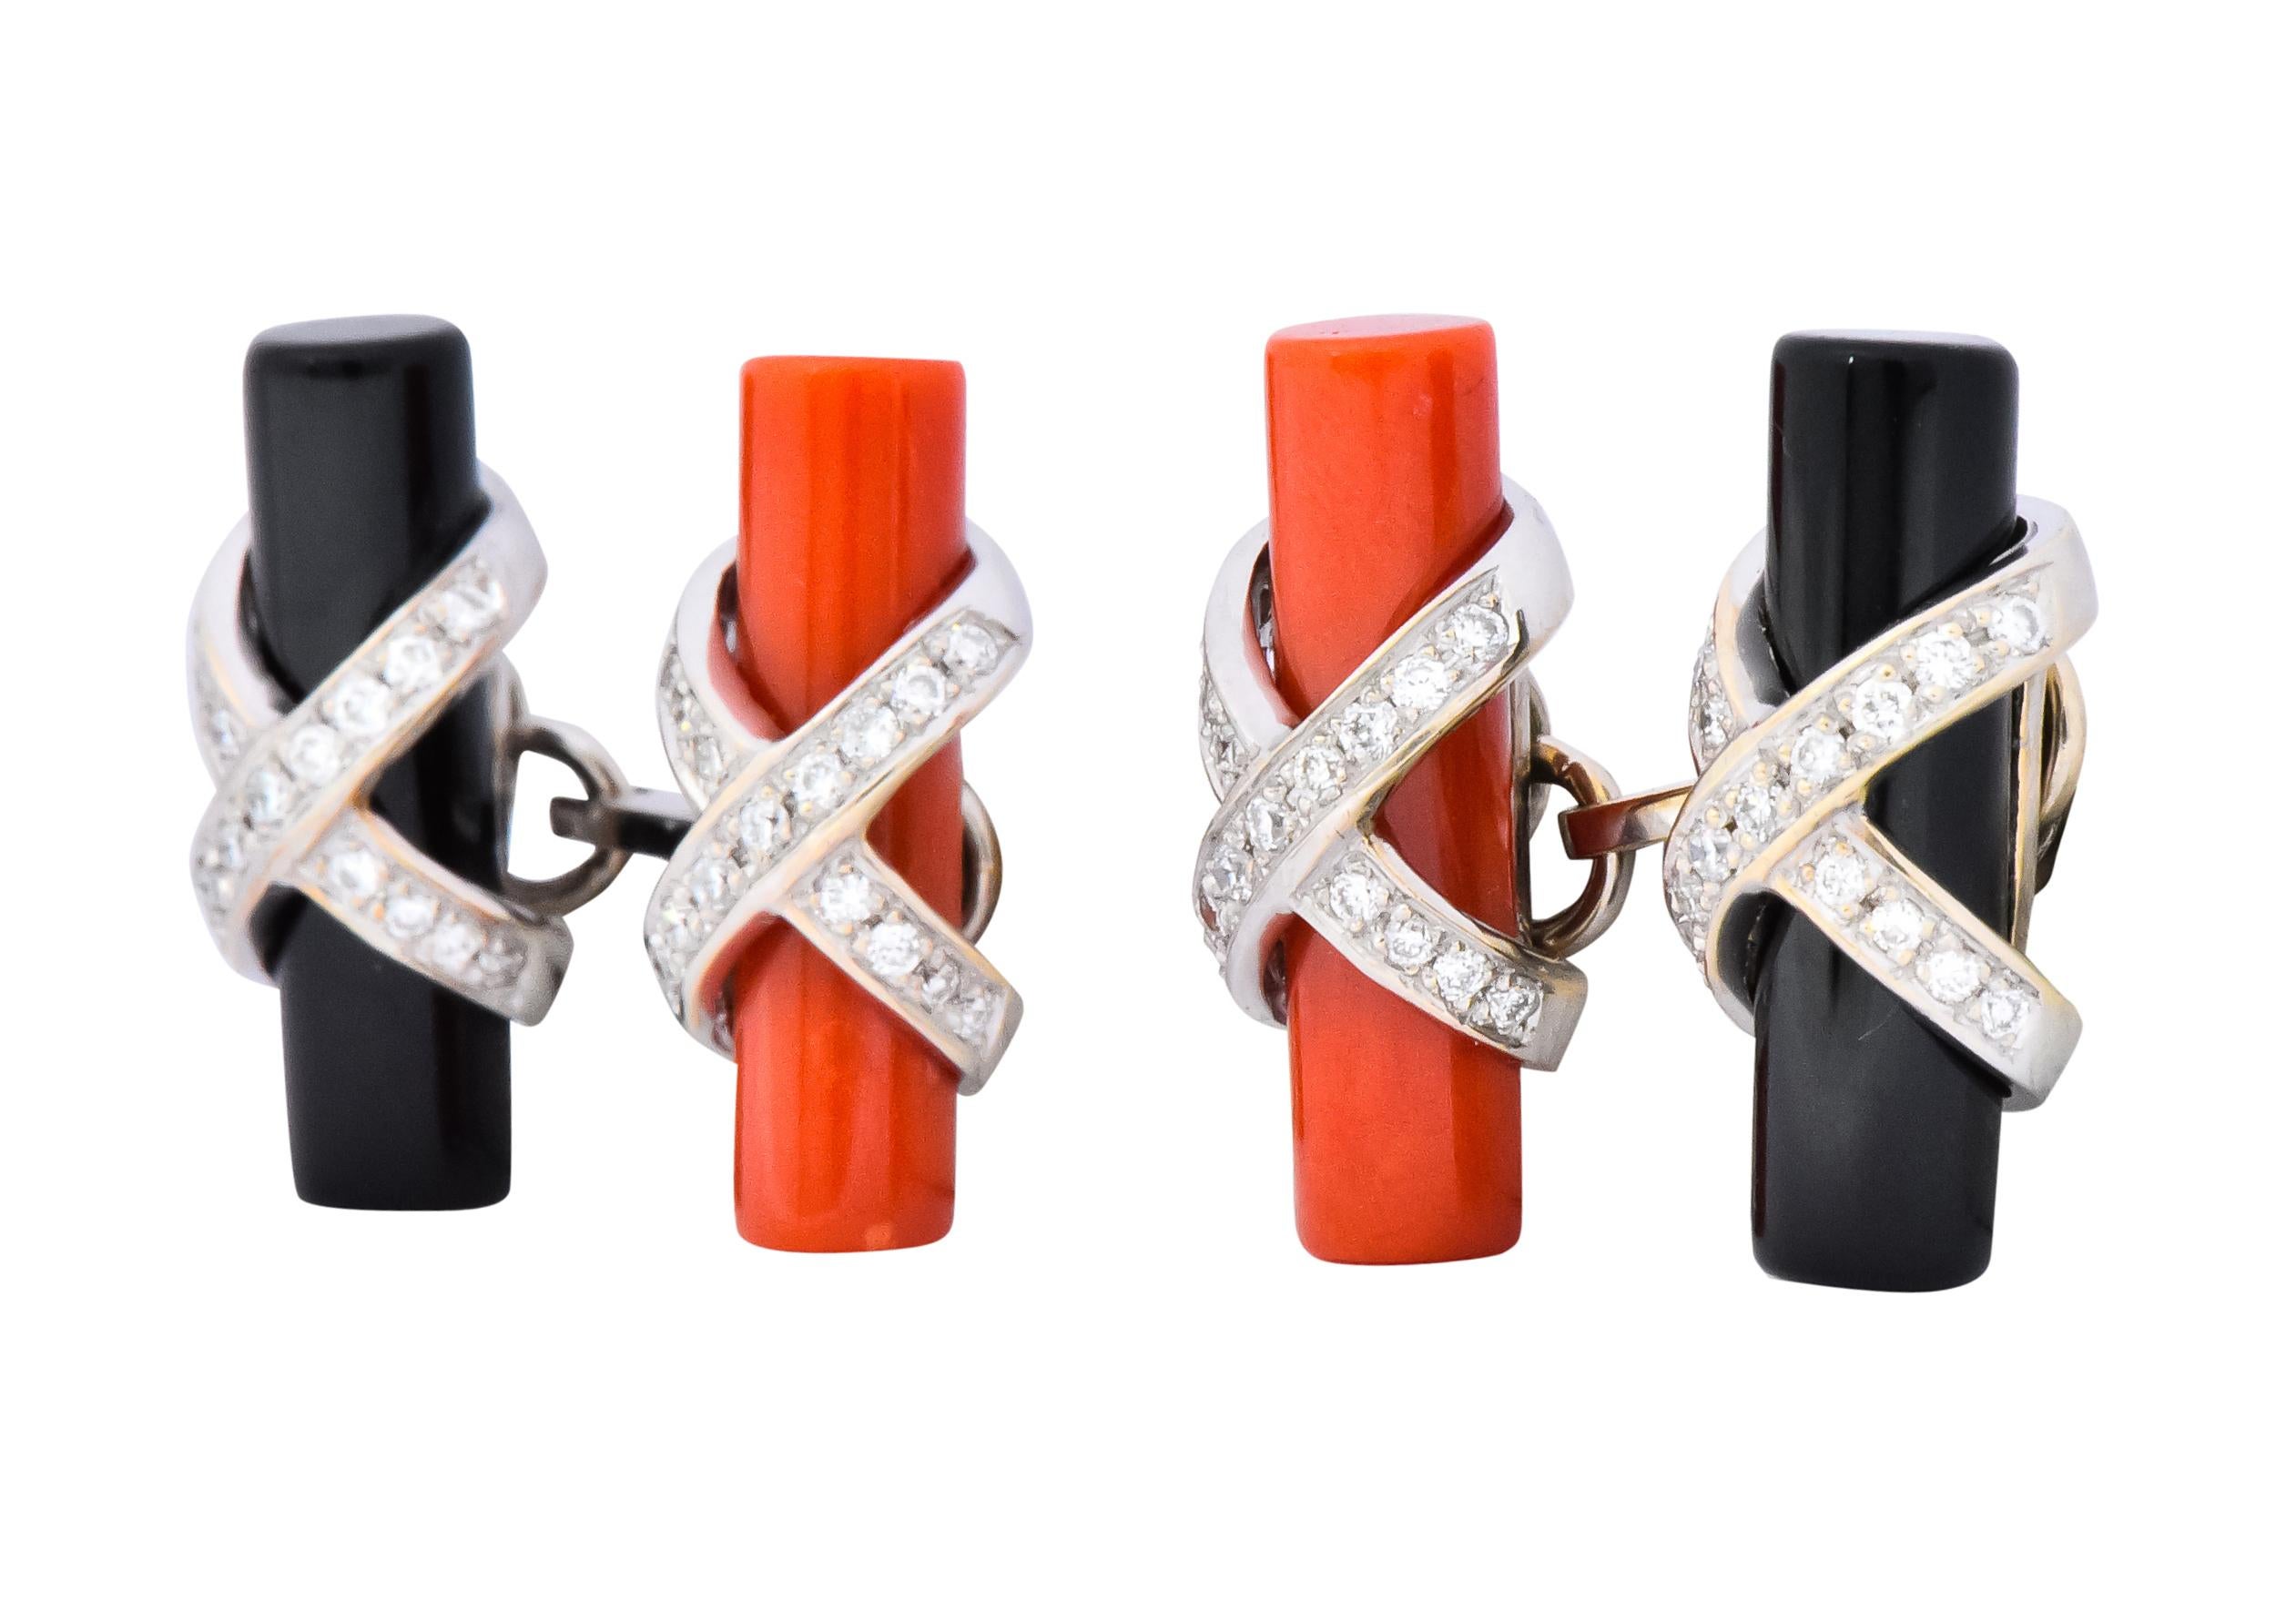 Each with one polished onyx and coral cylinder

Wrapped in an 